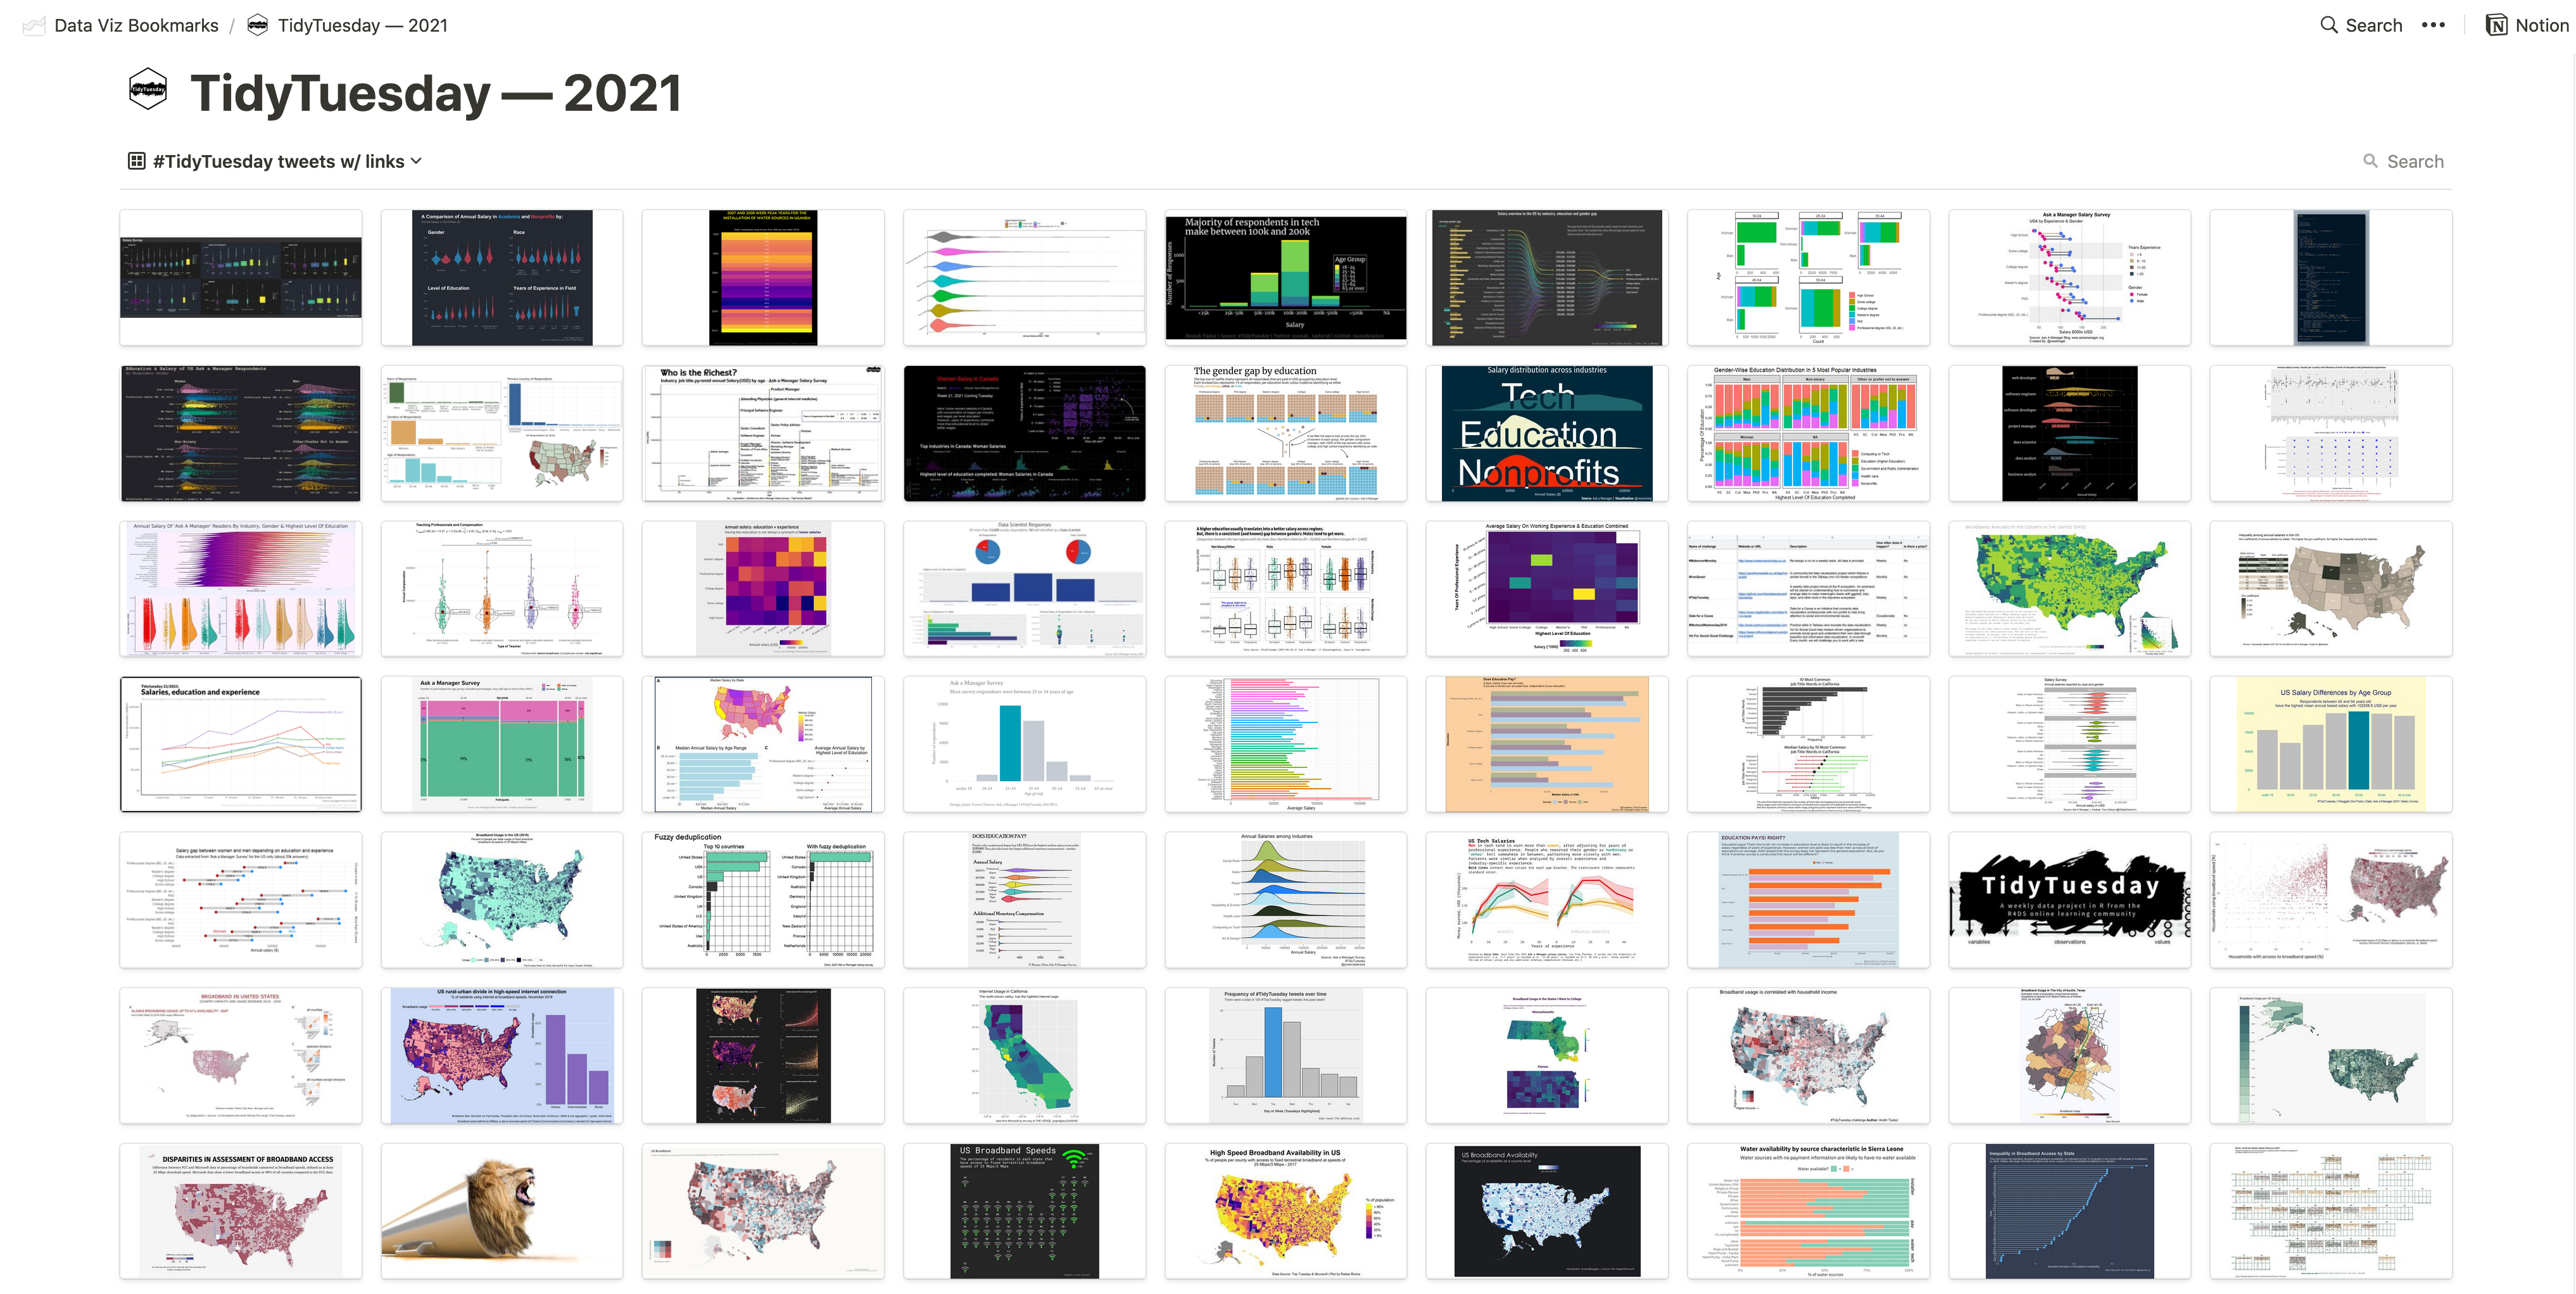 The Notion 2021 TidyTuesday database showing a gallery of the most recent data visualizations in the collection, organized in a grid,